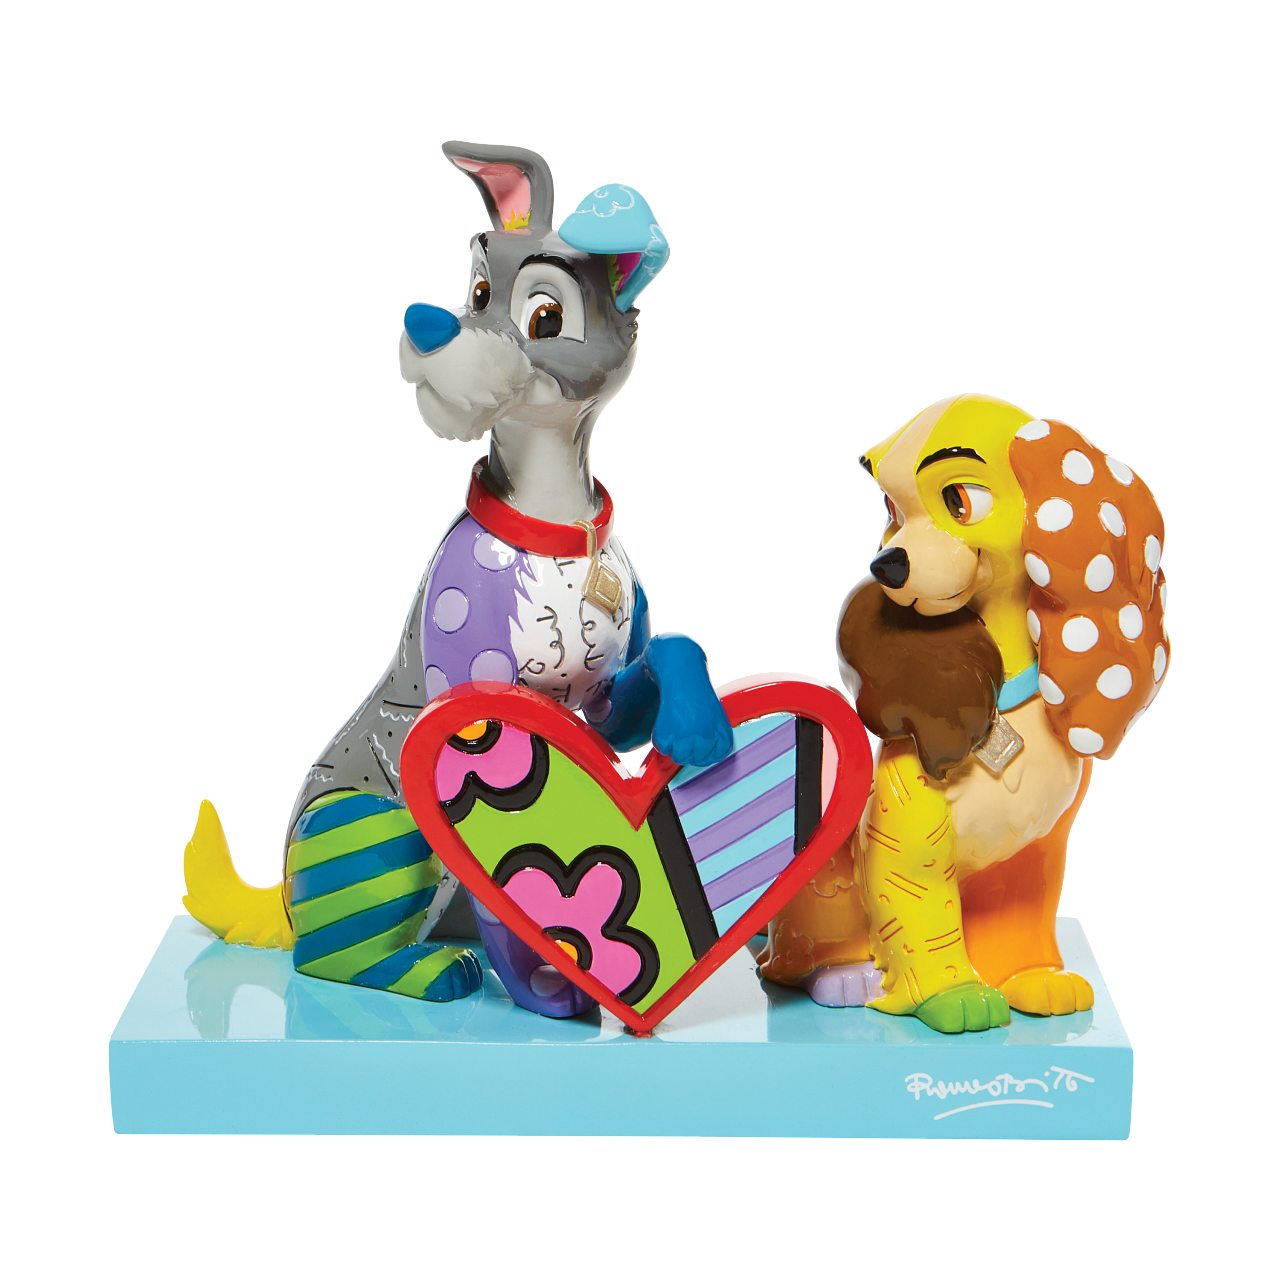 Disney Britto - Lady & the Tramp Numbered Limited Edition 3000 - britto, Disney, enesco, lady & the tramp, limited edition, New Arrivals - Gadgetz Home